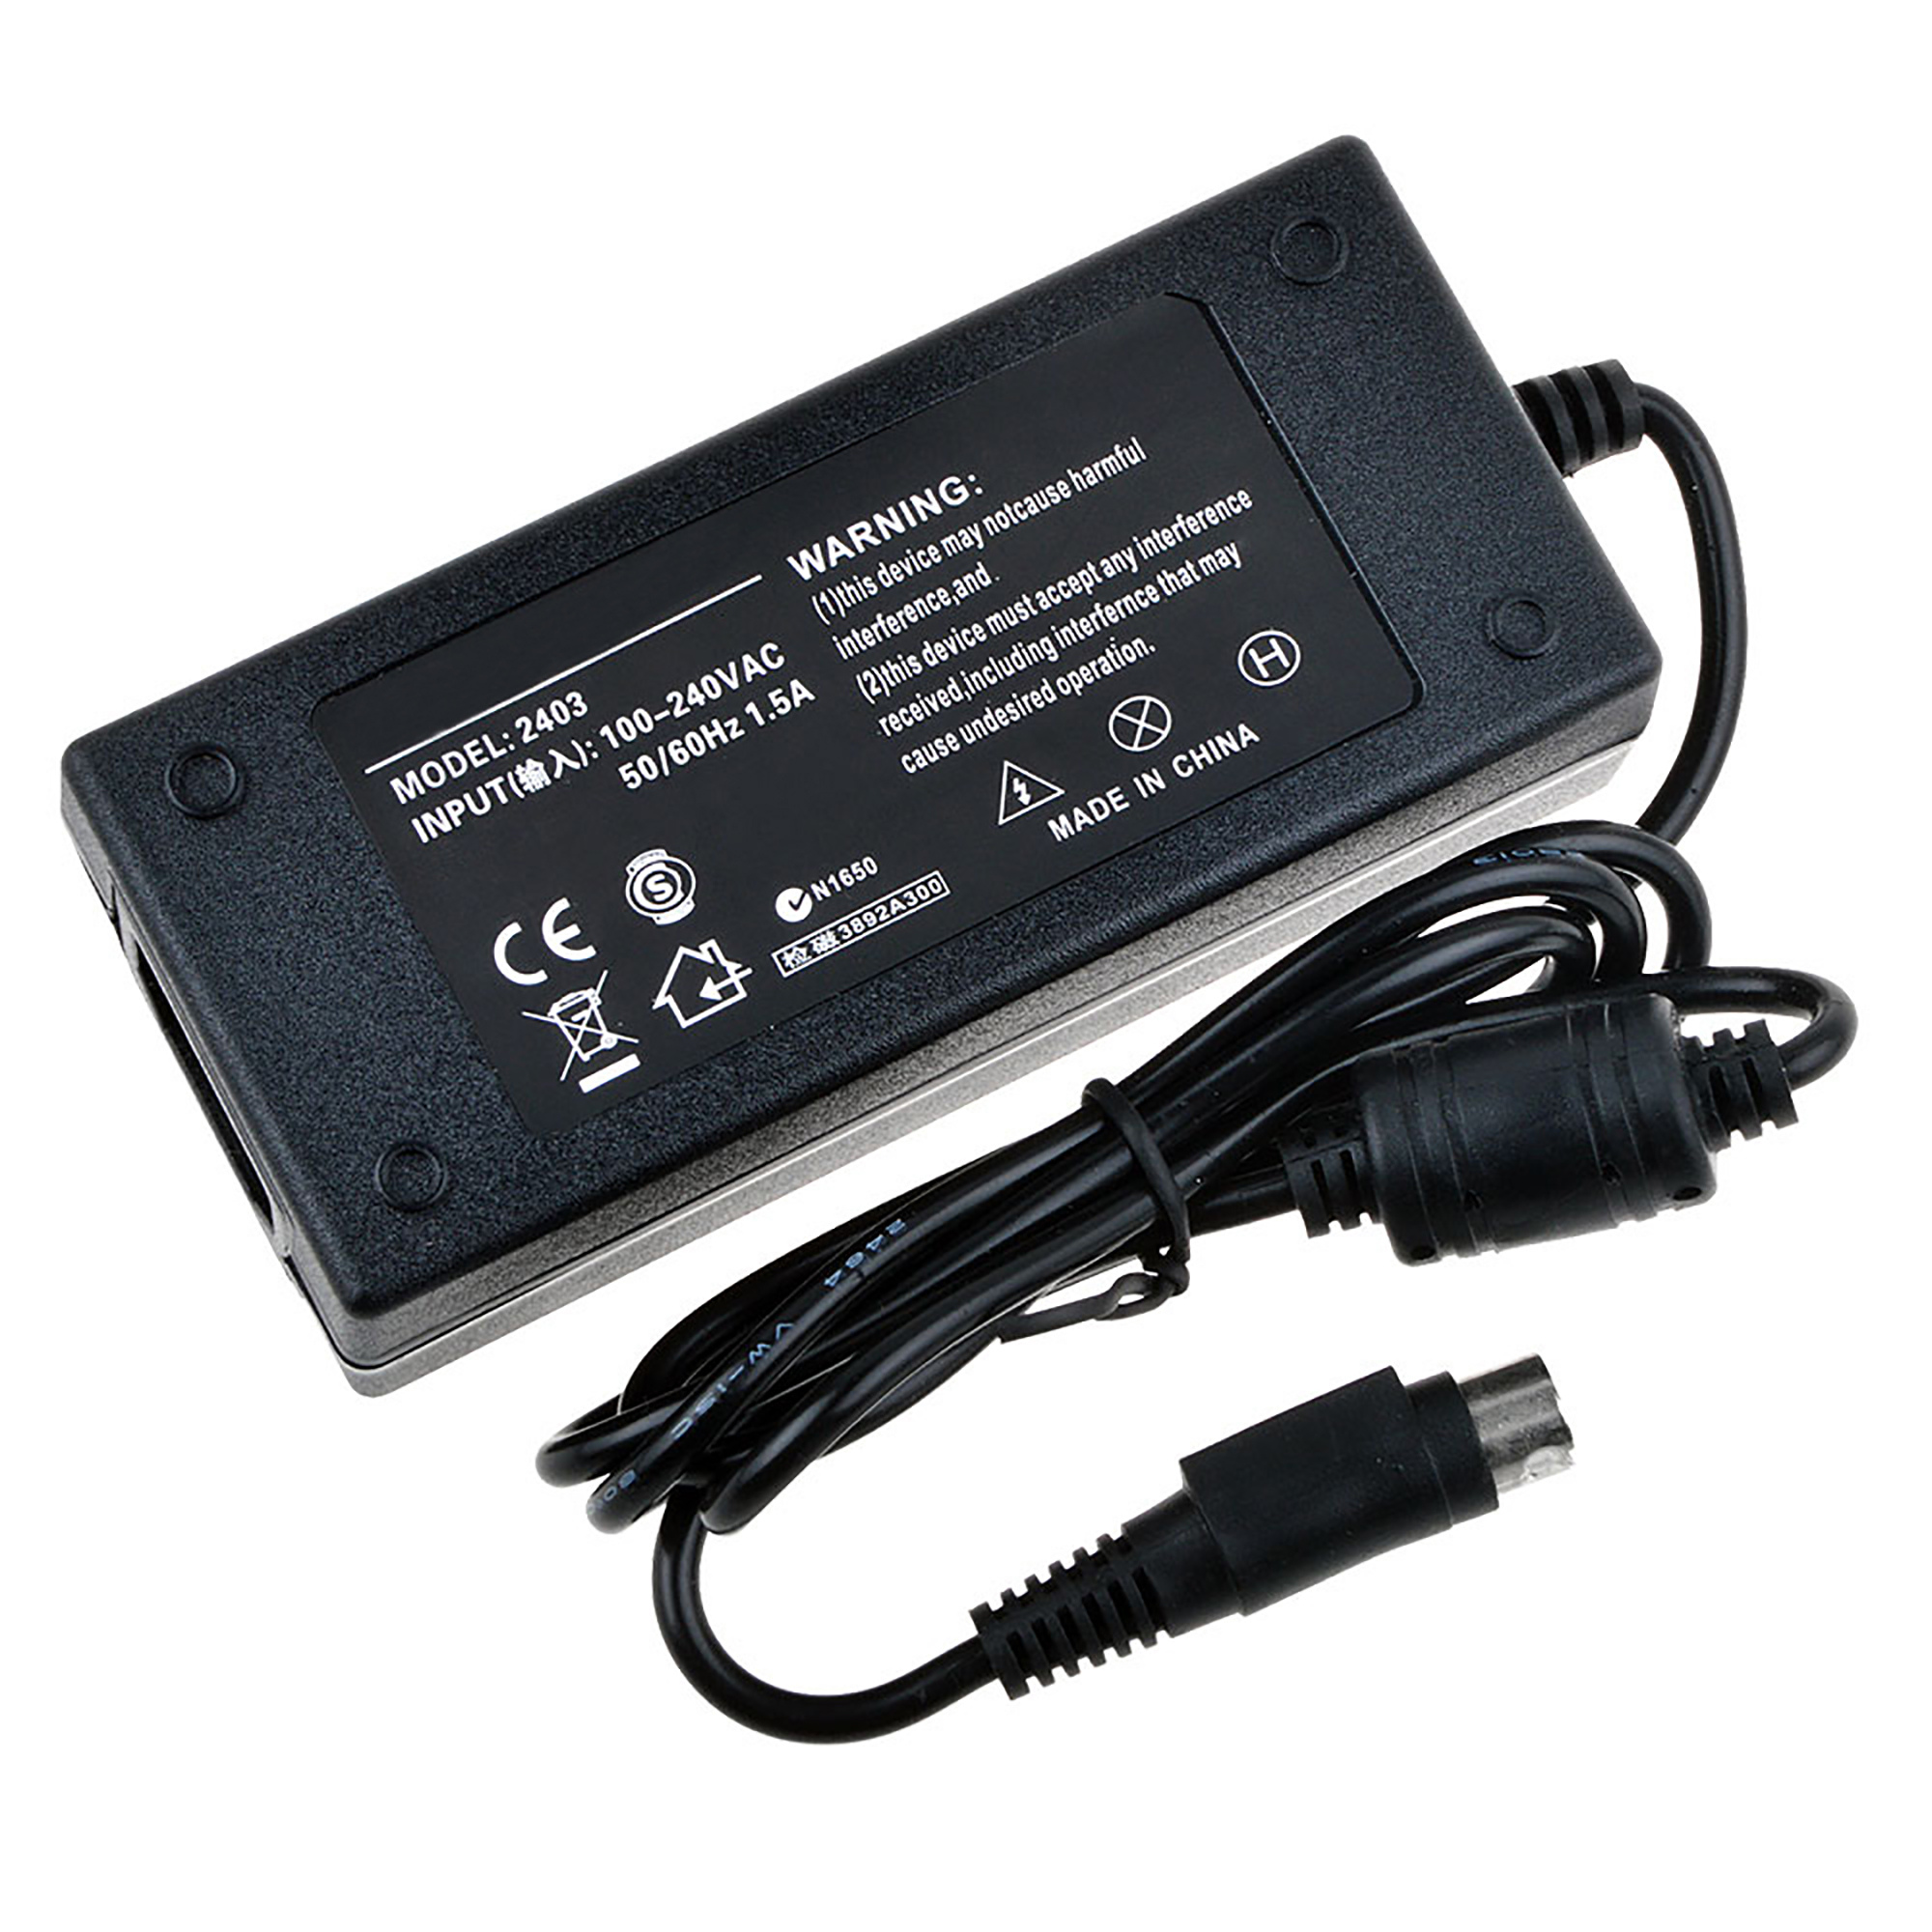 PKPOWER 4-Pin AC DC Adapter For StarTech SATDOCK4U3E SATDOCK4U3RE SDOCK4U33 S3540BU33E SAT35401U 4 Bay eSATA USB 3.0 to SATA HD Docking Station Hard Disk Drive Enclosure HDD Star Tech Power Supply - image 4 of 5